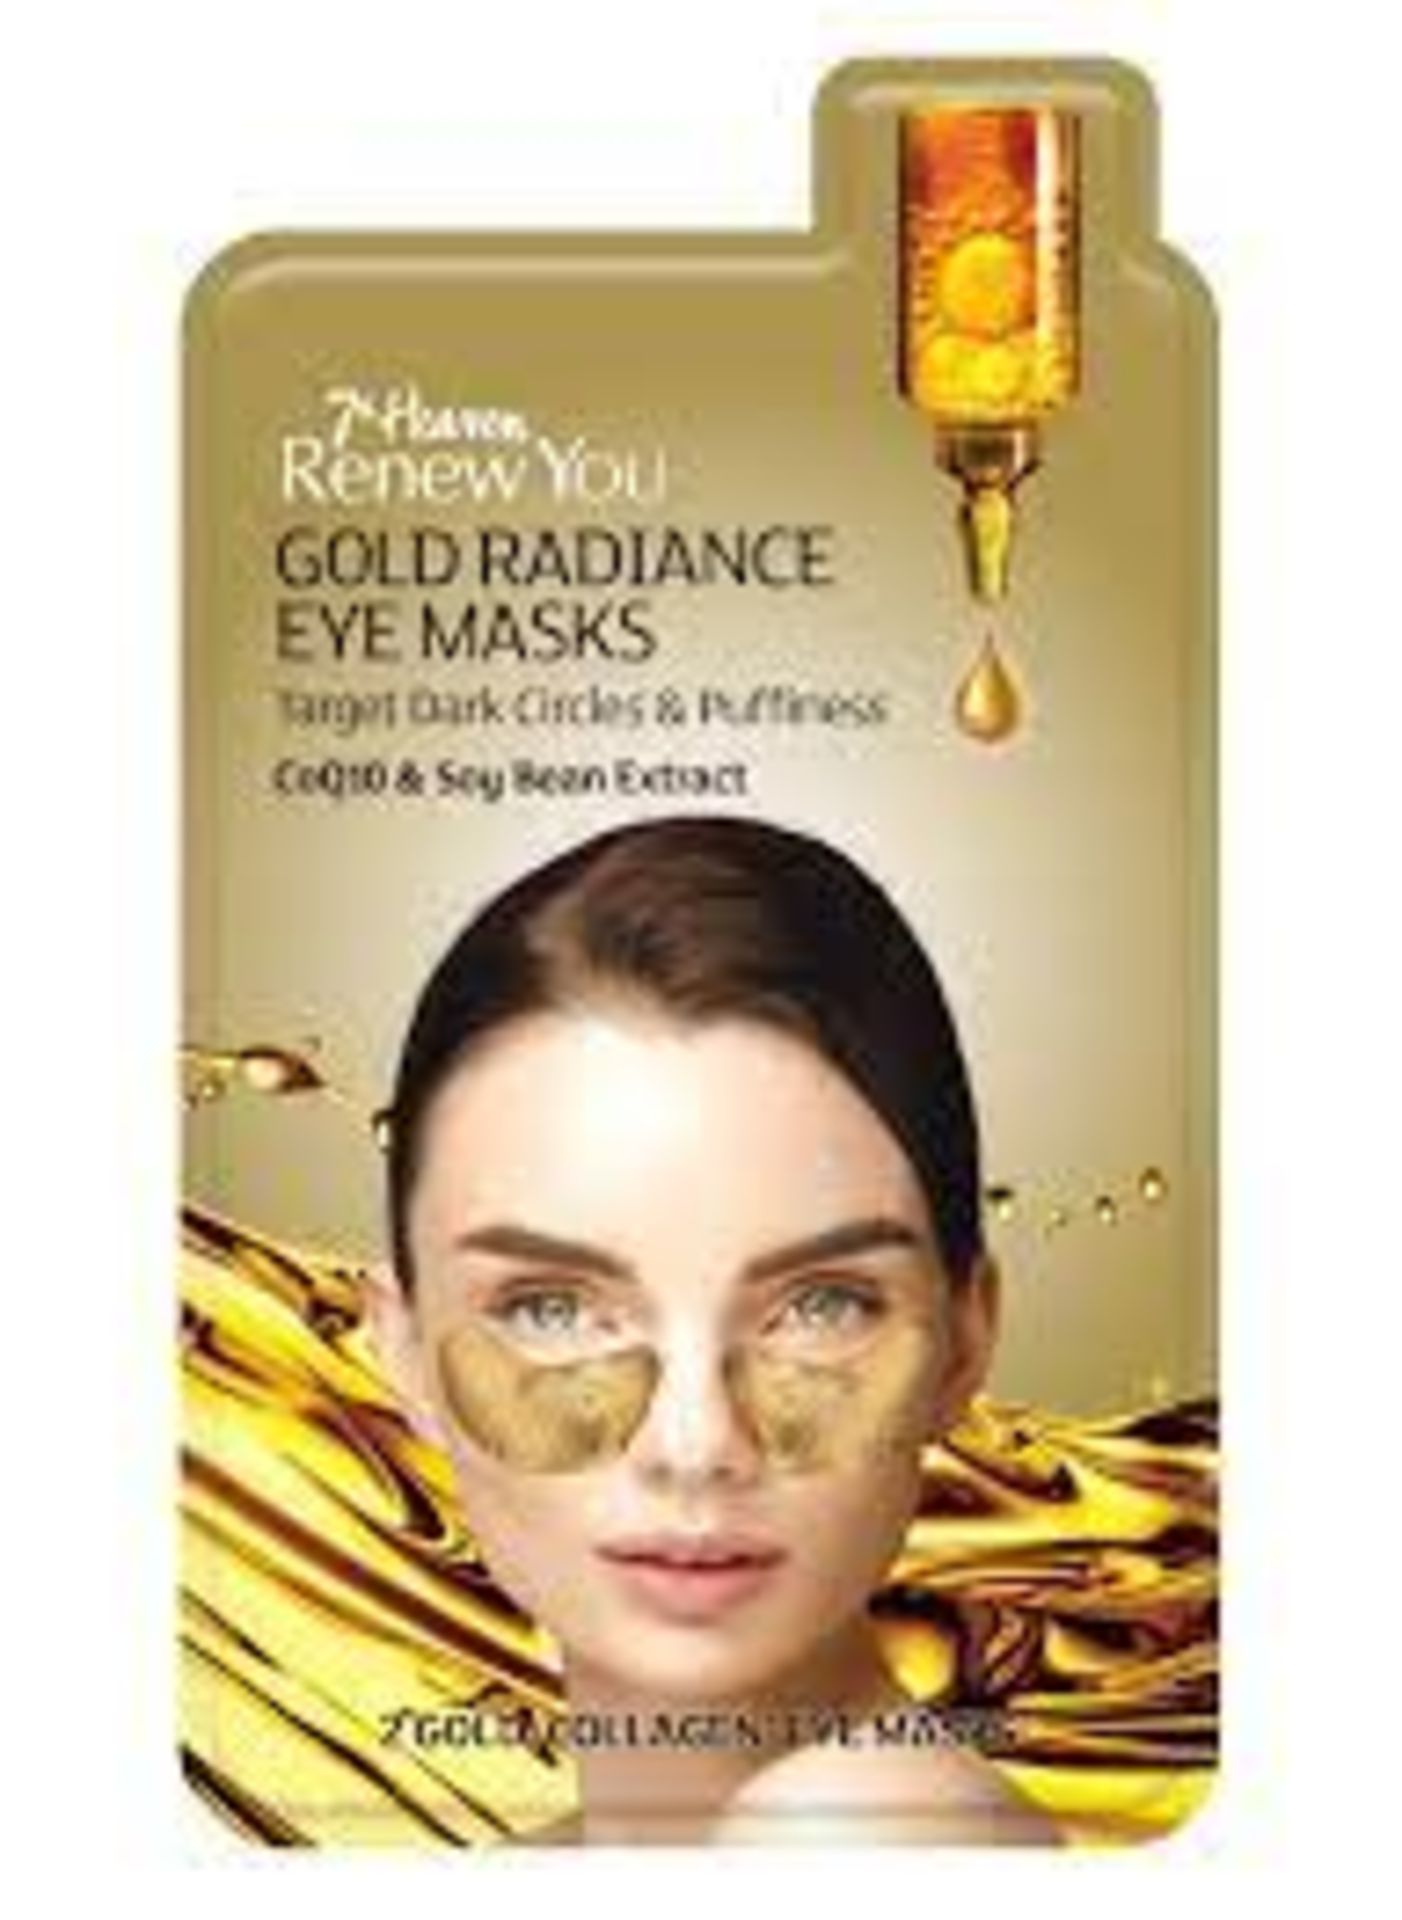 444 X BRAND NEW 7TH HEAVEN RENEW YOU GOLD RADIANCE PACK OF 2 EYE MASKS, TARGETS DARK CIRCLES AND